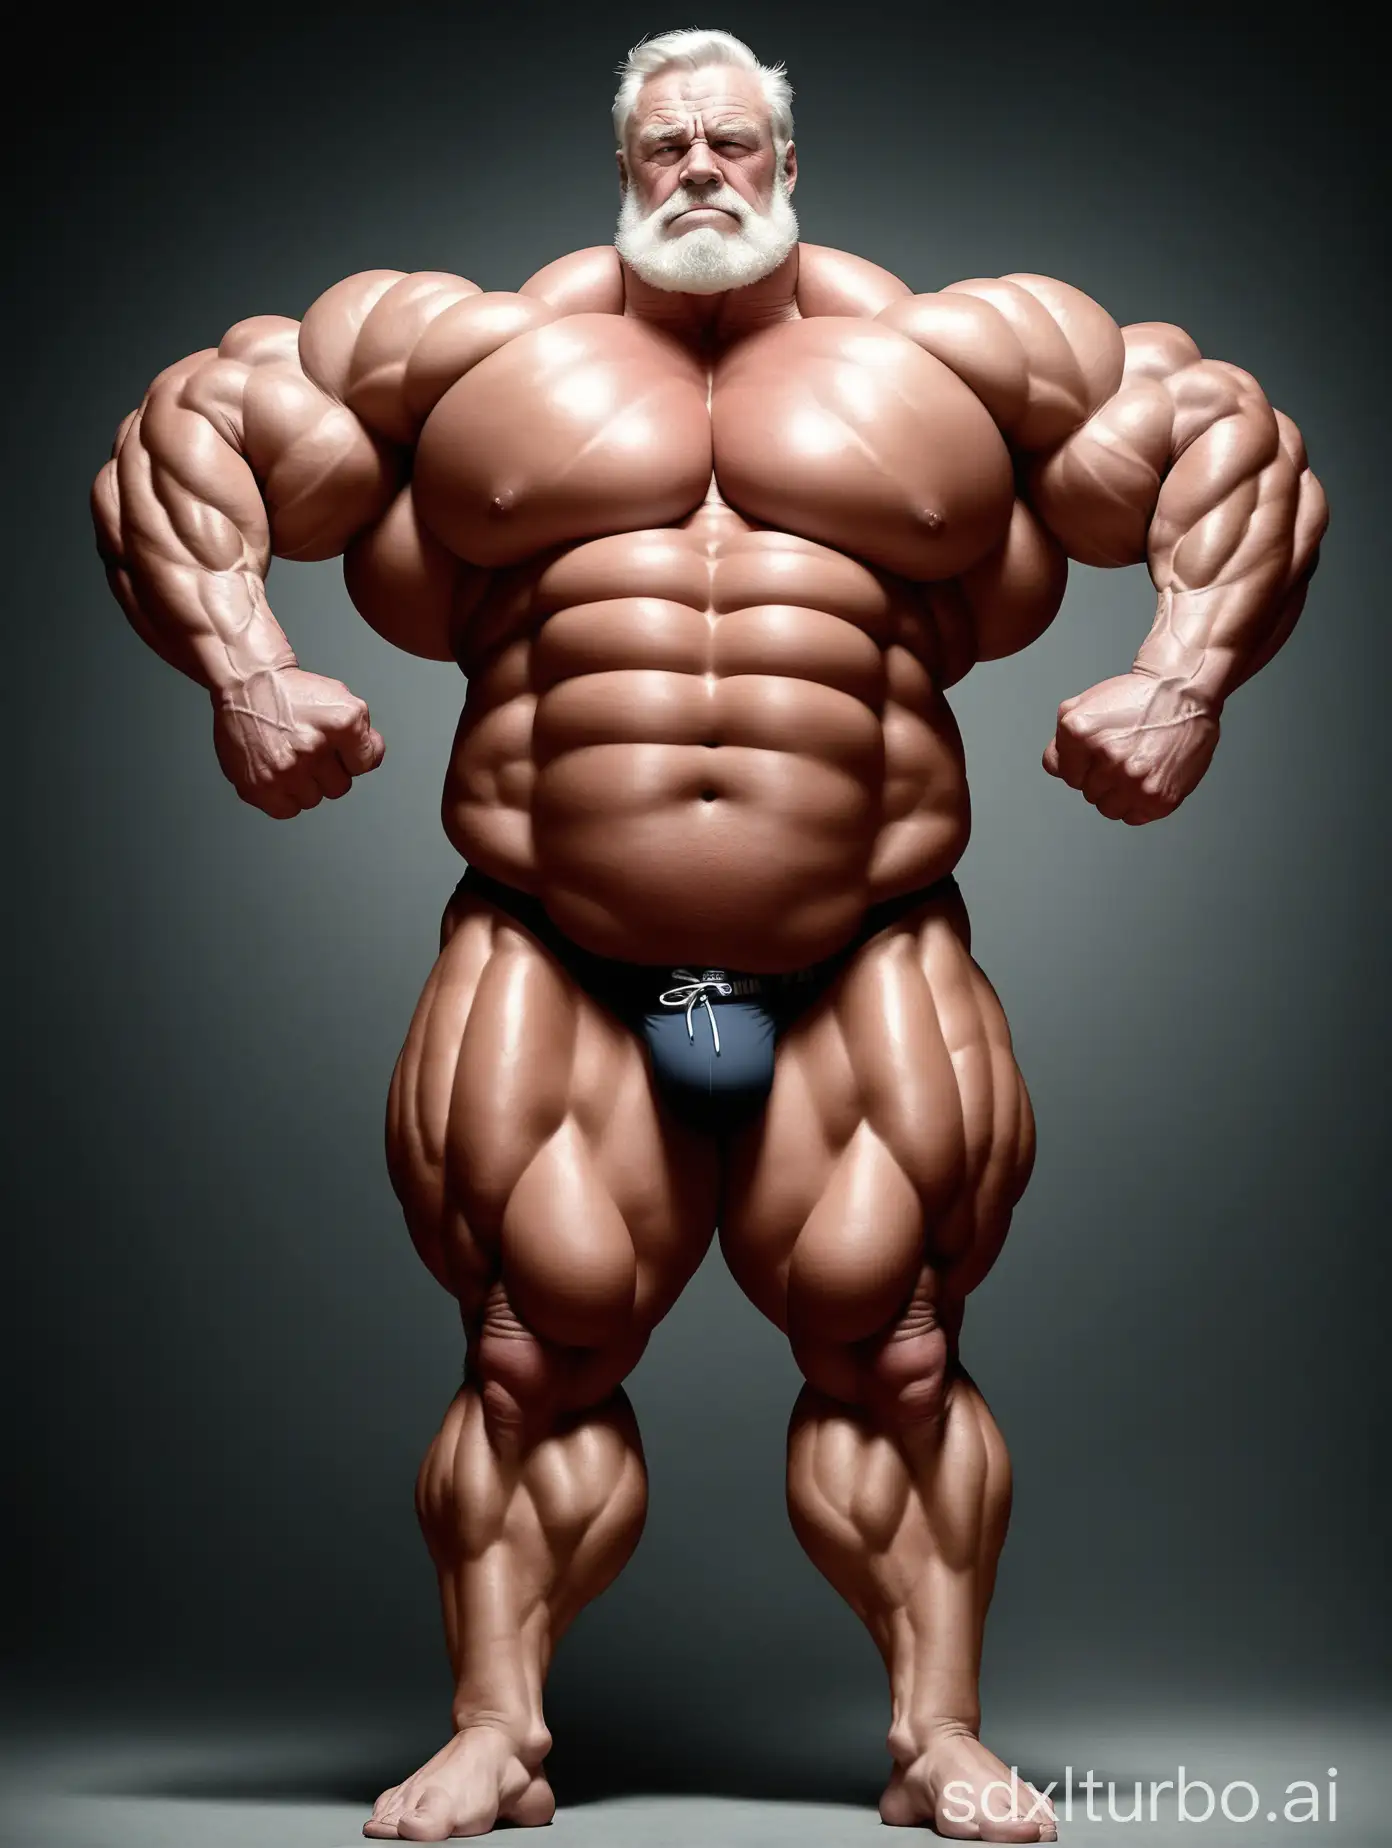 Muscular-Elderly-Giant-Demonstrating-Strength-in-a-Dynamic-Pose